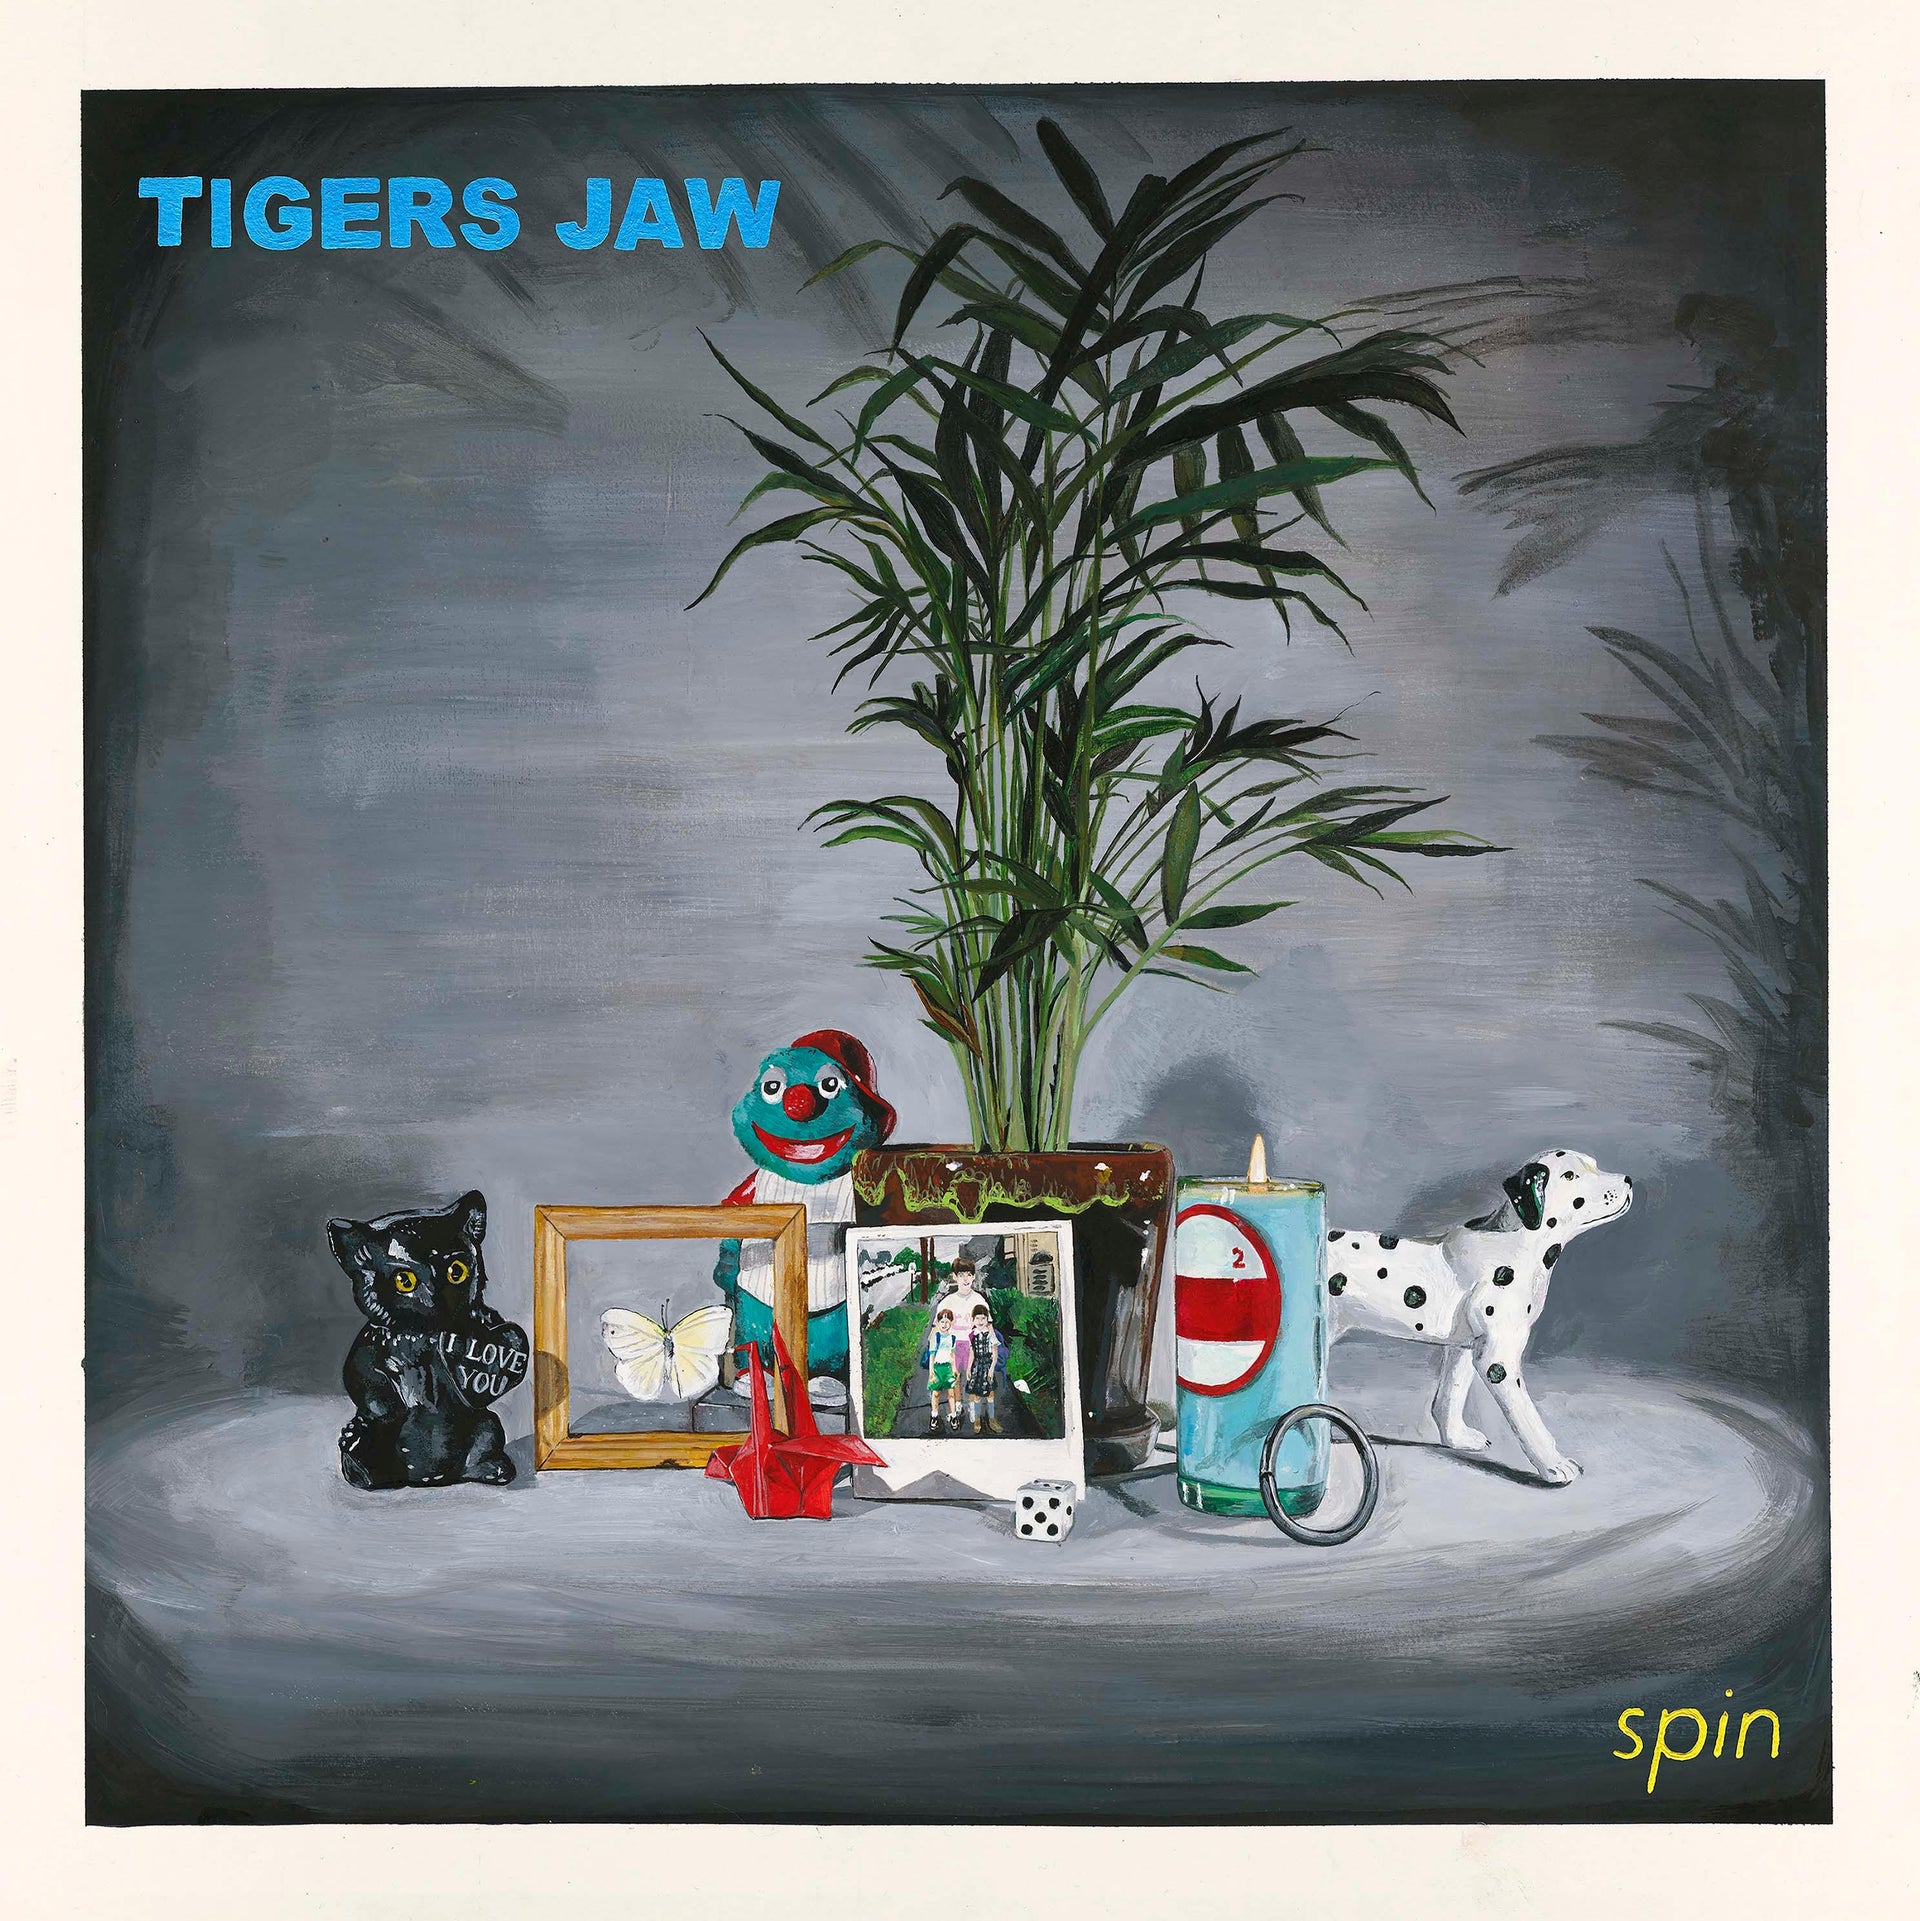 Buy – Tigers Jaw "Spin" 12" – Band & Music Merch – Cold Cuts Merch